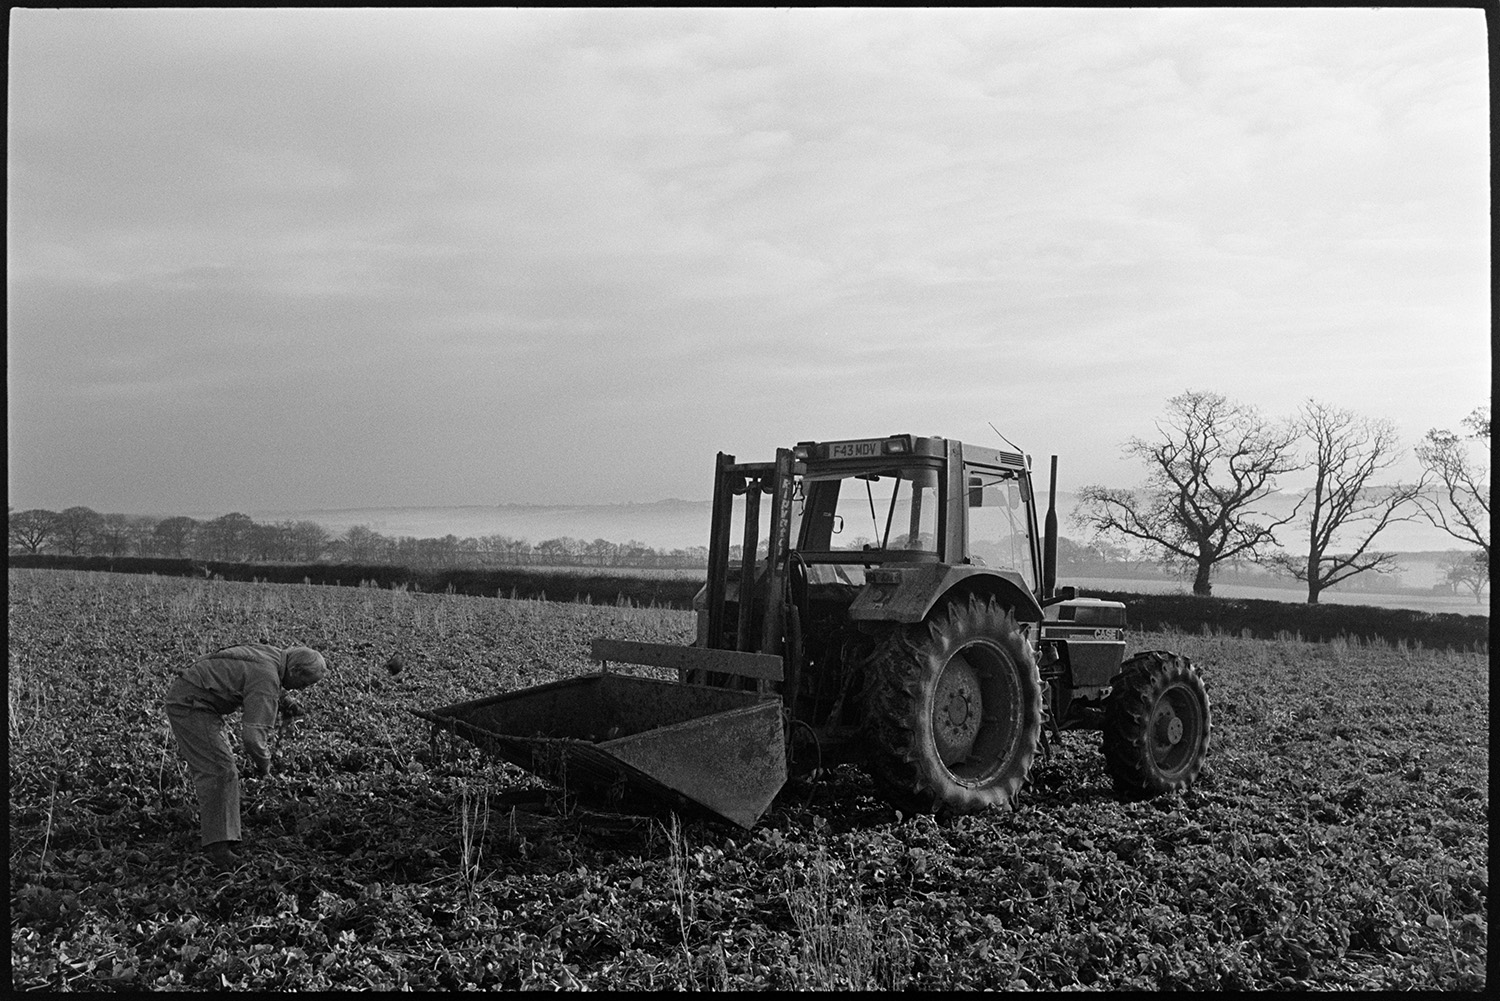 Farmer lifting swedes, early morning with frost. 
[A man lifting swedes by hand and putting them into a link box attached to a tractor, in a field at Parsonage Farm, Chulmleigh. The ground is frosty and early morning mist can be seen amongst the trees in the background.]